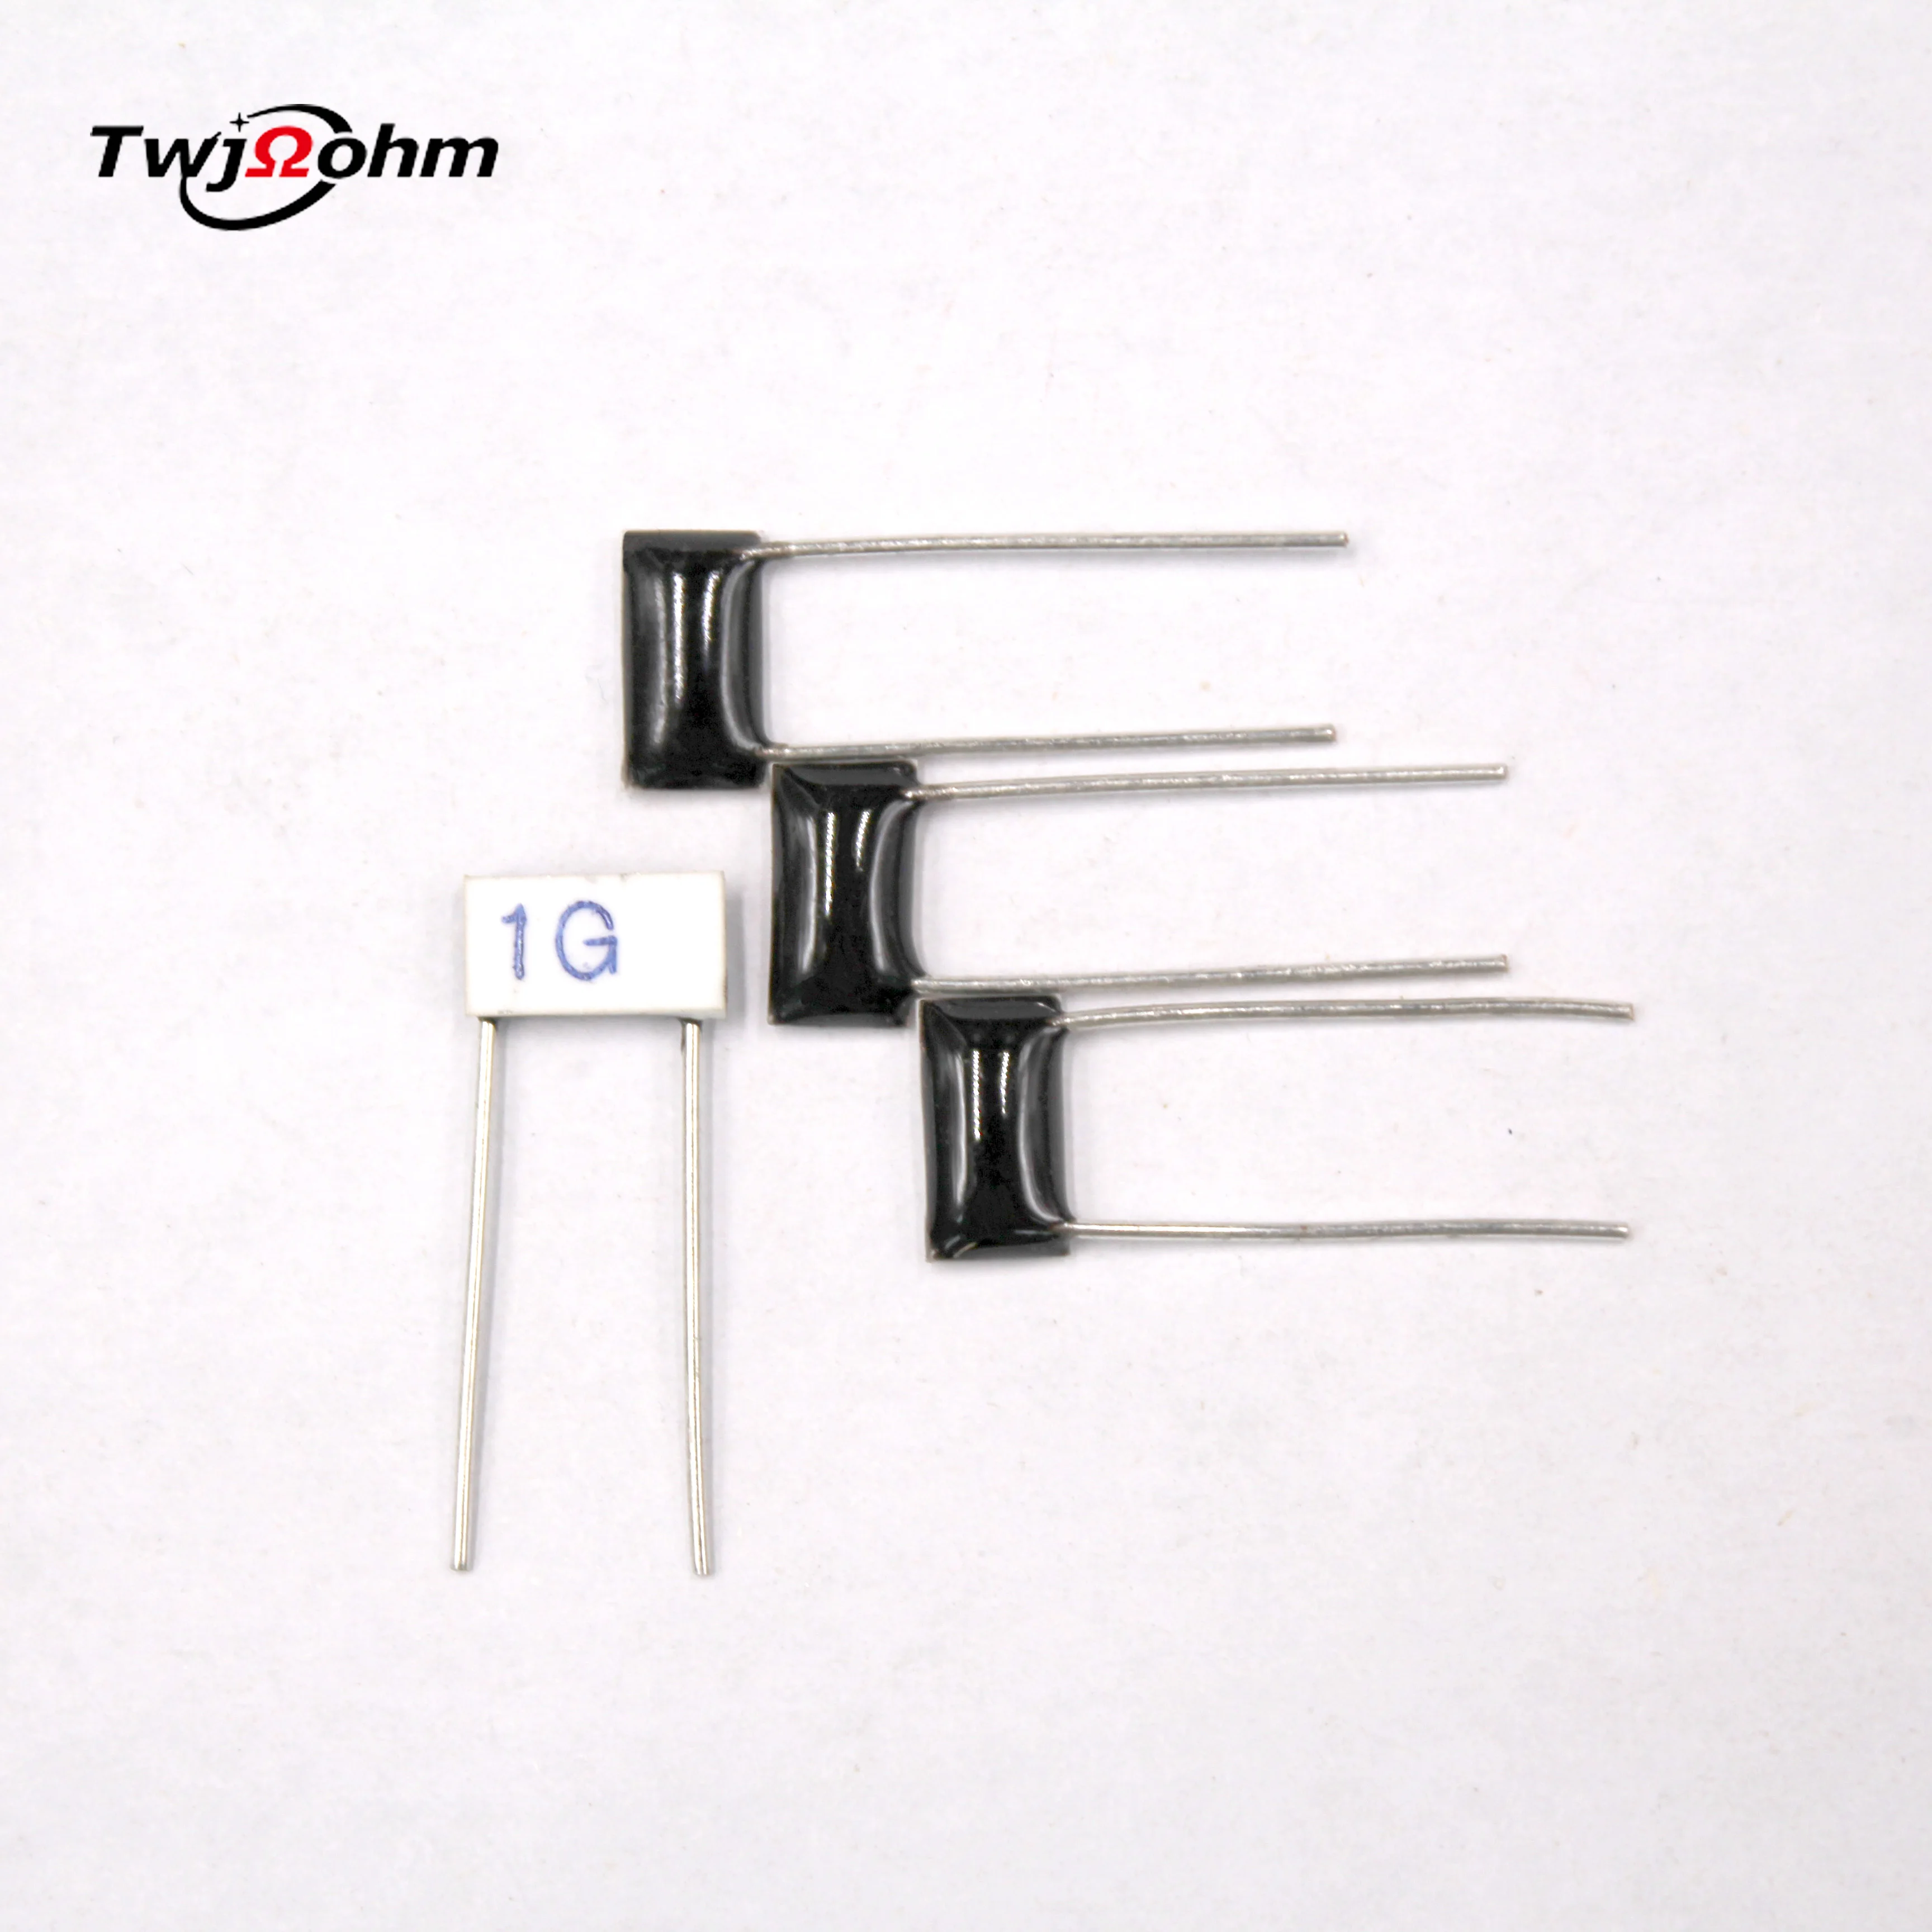 10Pcs HVR82MZ1005 thick film chip resistor 100M50M200M30M500M1G2G5G Ohmic ceramic chip microphone specific high-voltage resis adjustable sensitive cctv microphone audio monitor for ip camera hi fi sound imported high fidelity low noise processing chip